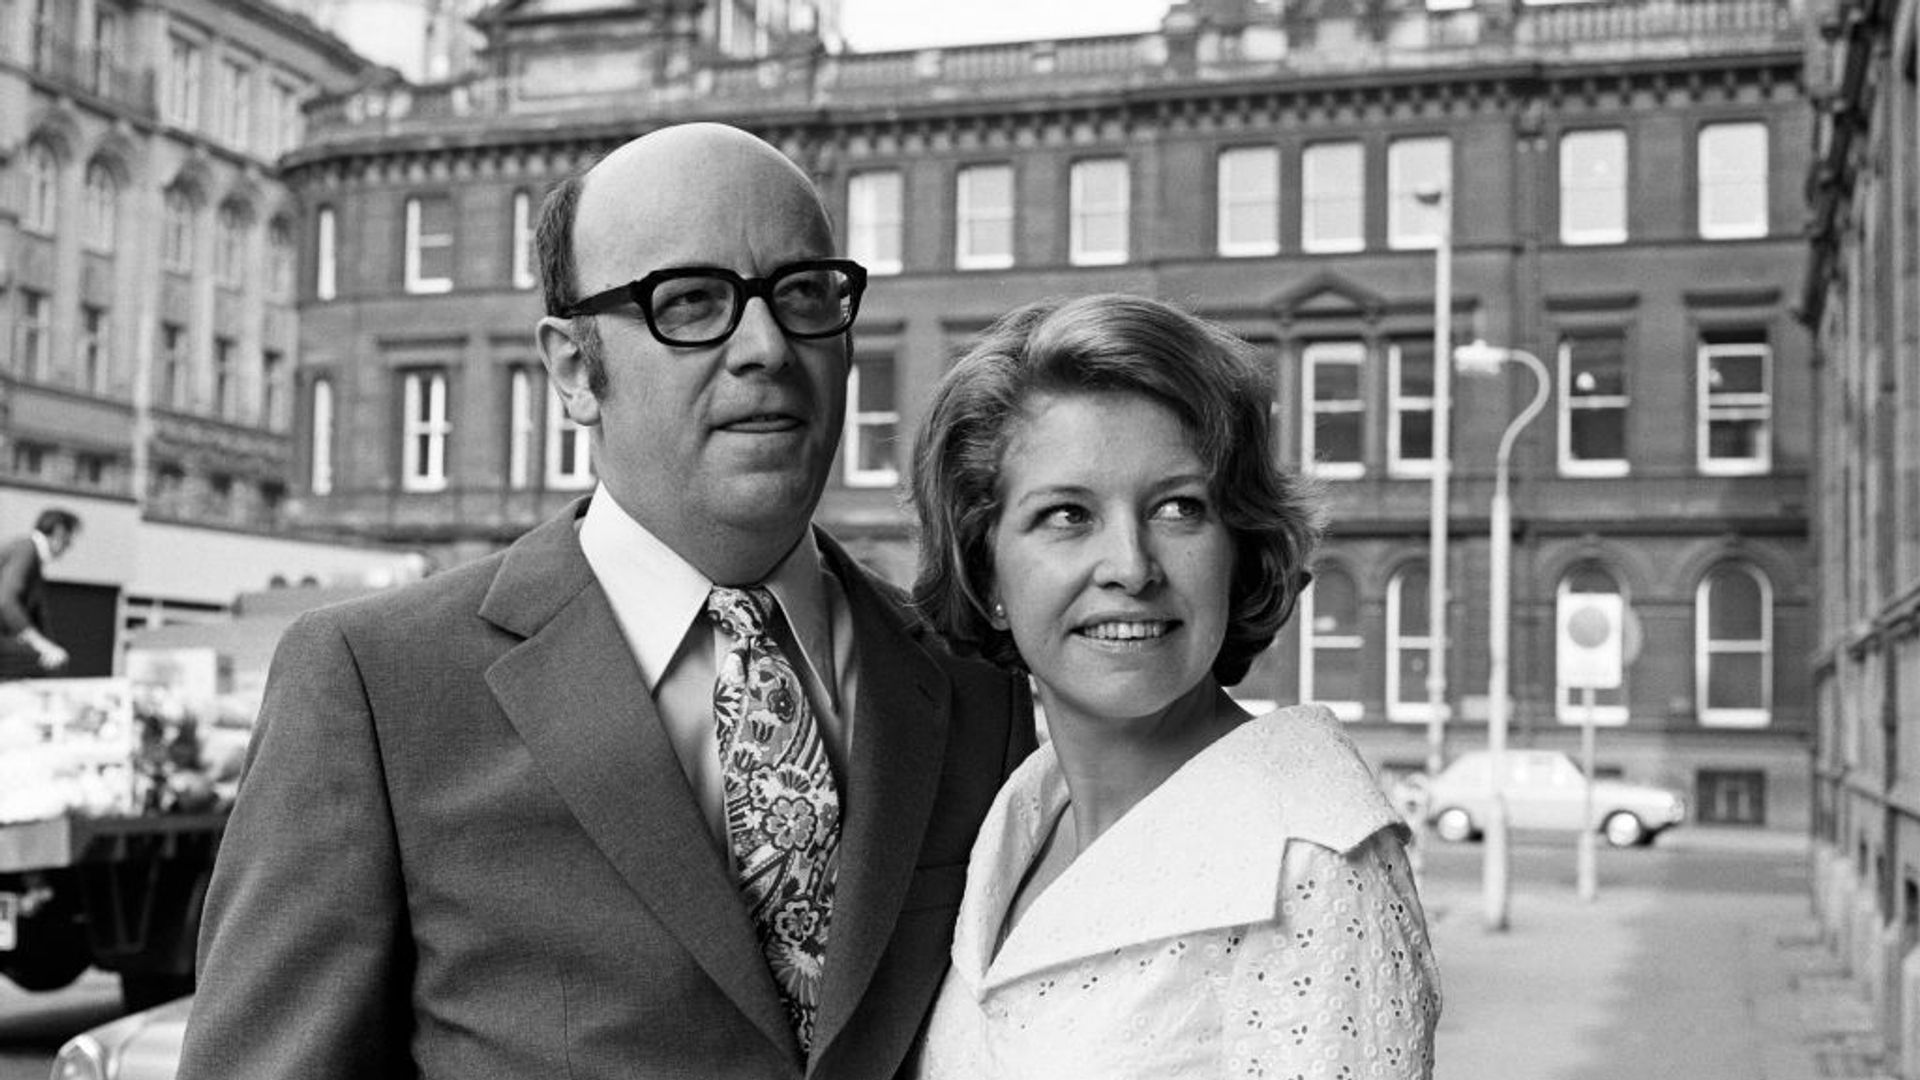 Anne Reid on her wedding day with husband Peter Eckersley 